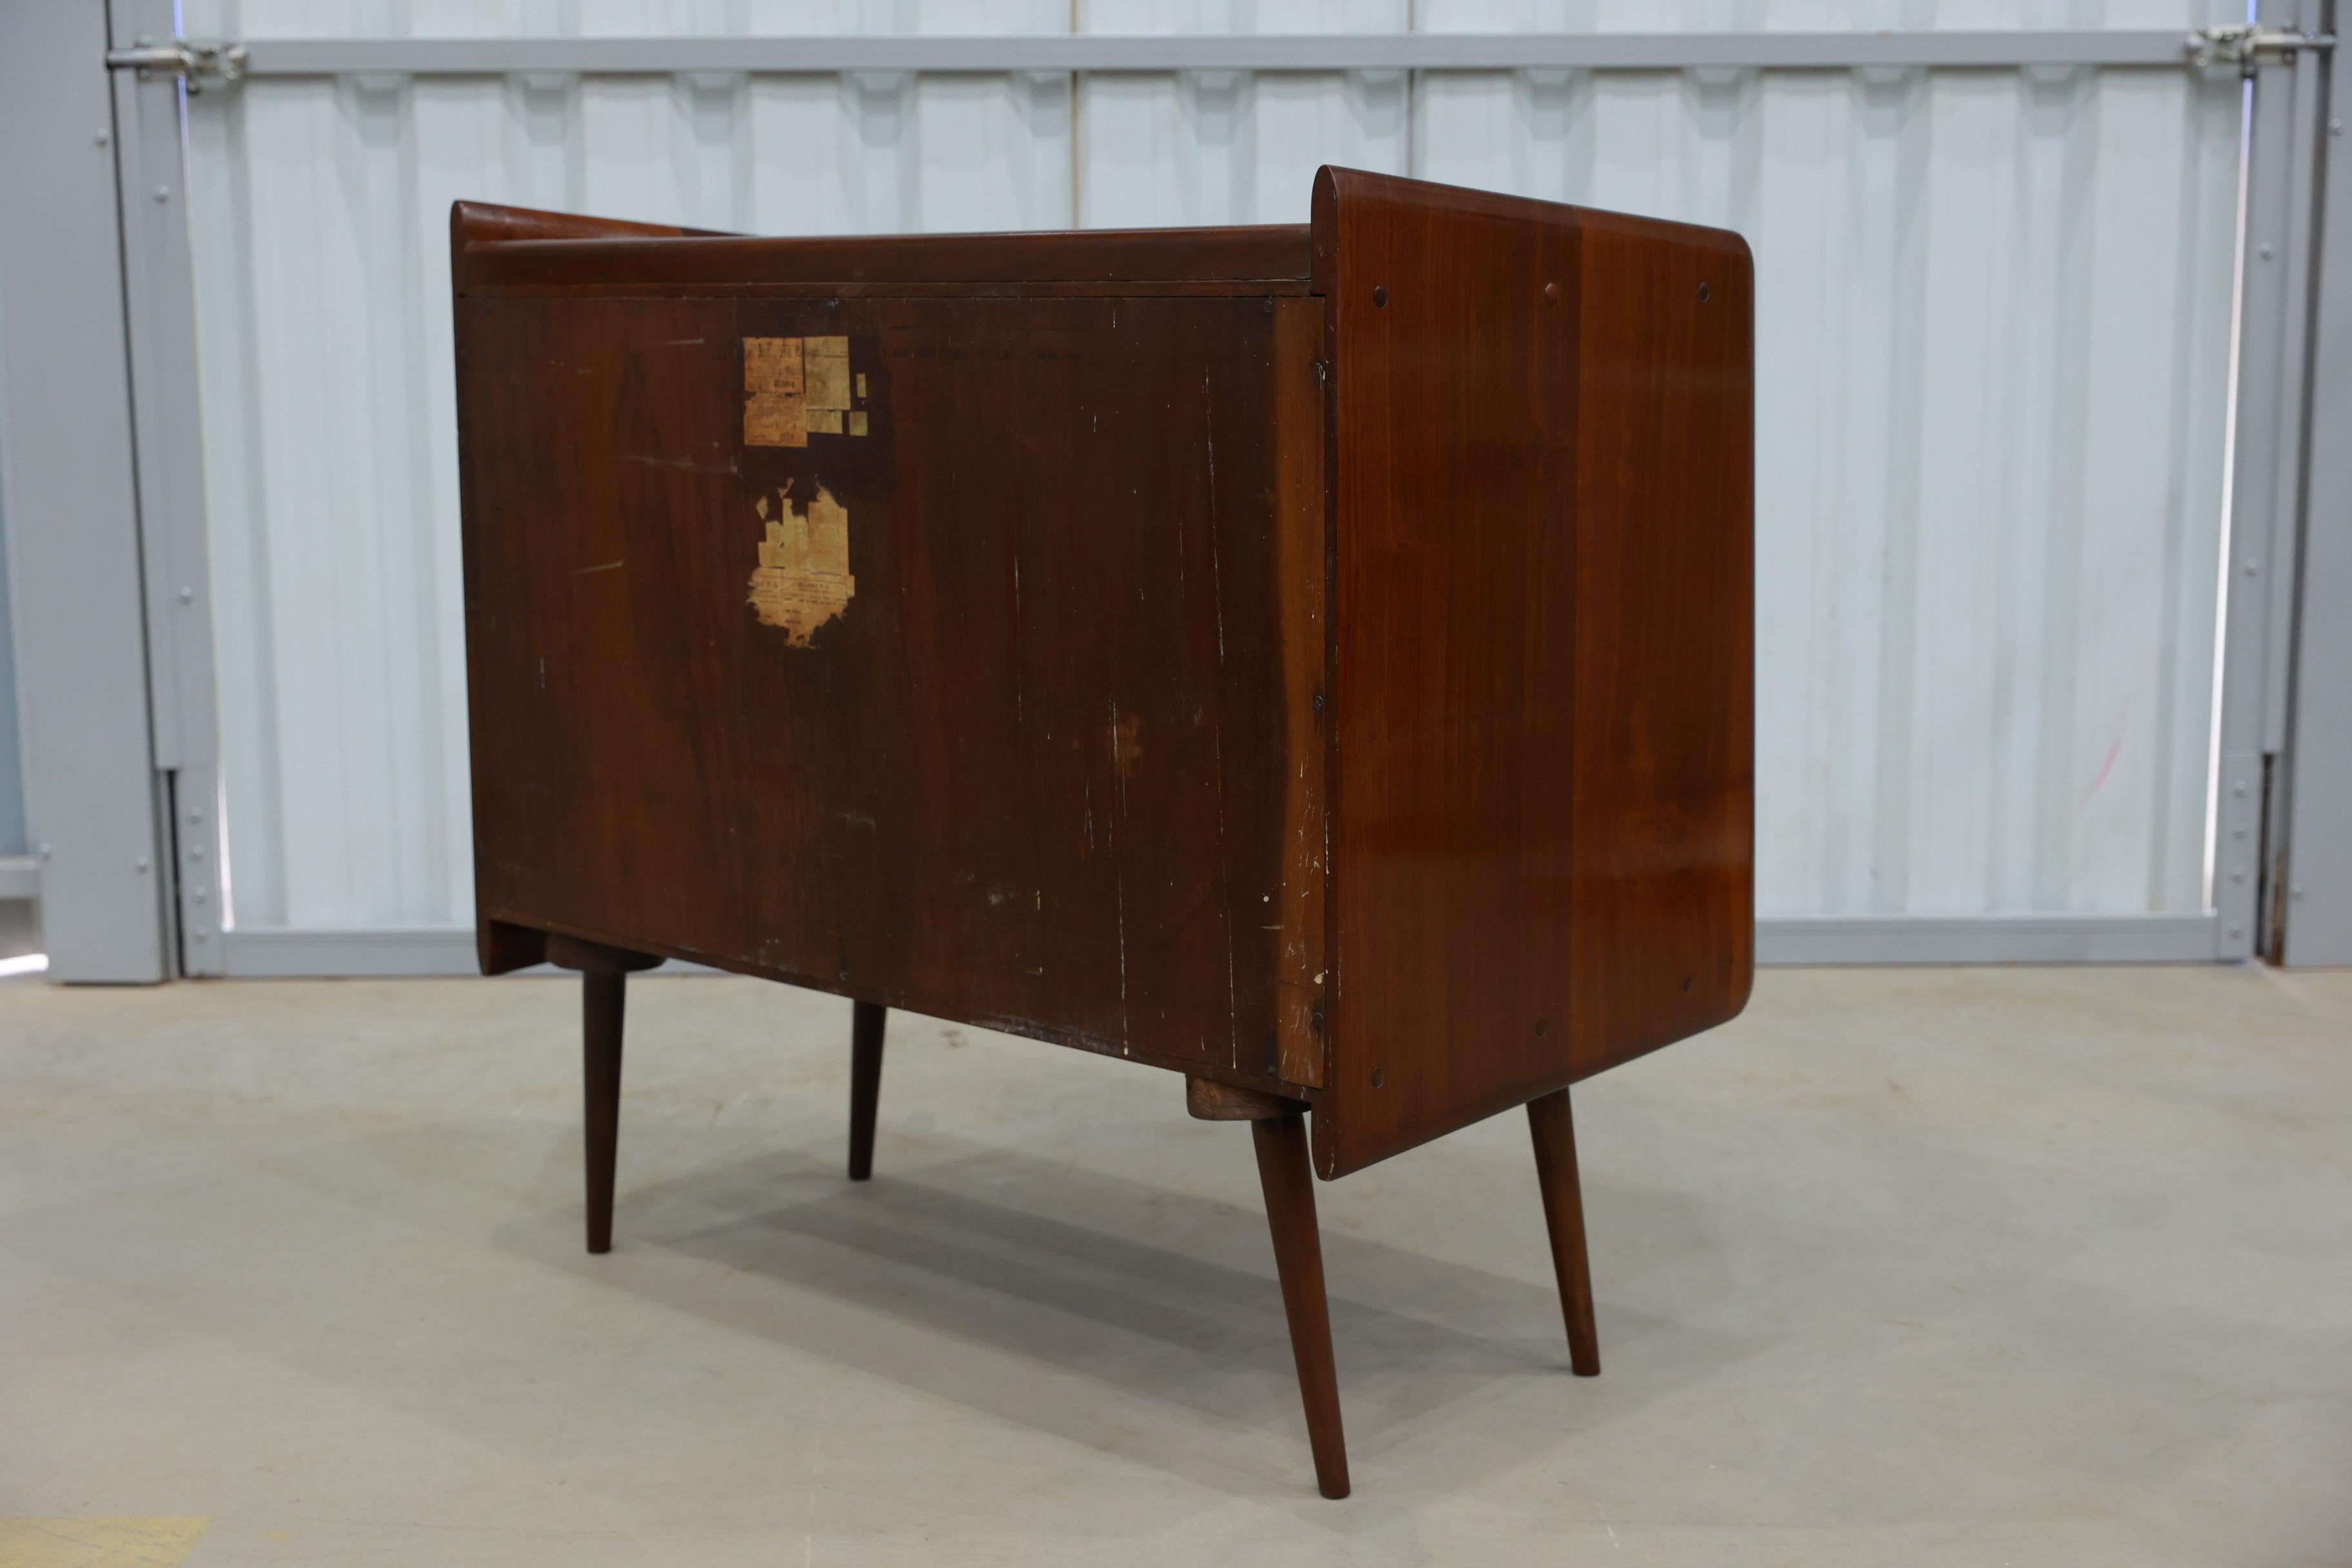 Brazilian Modern Chest of Drawers in Hardwood by Moveis Cimo, 1950s, Brazil For Sale 6